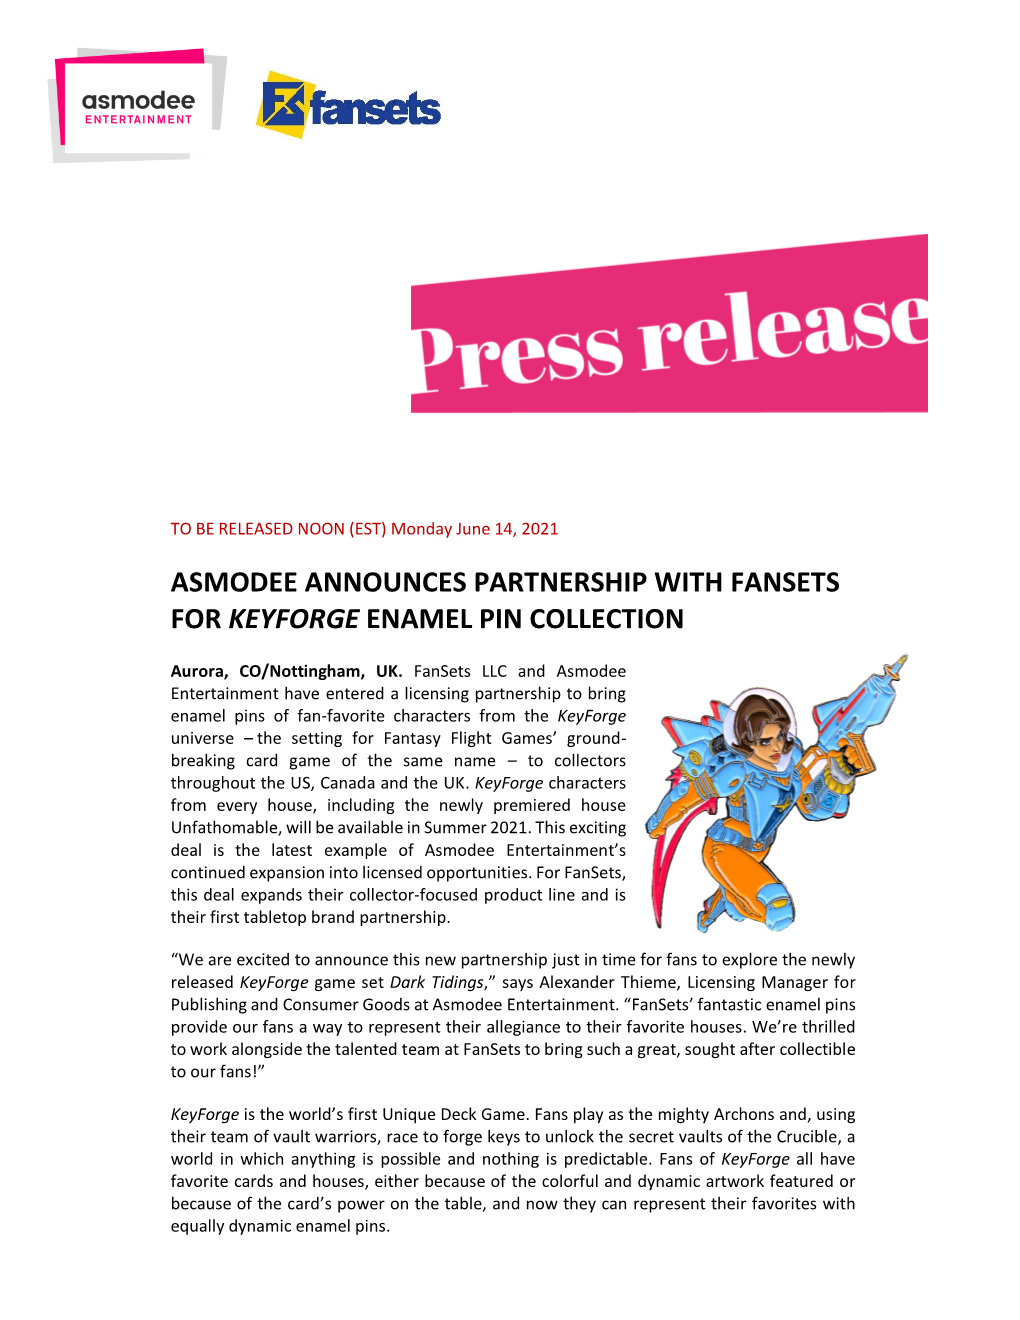 Asmodee Announces Partnership with Fansets for Keyforge Enamel Pin Collection